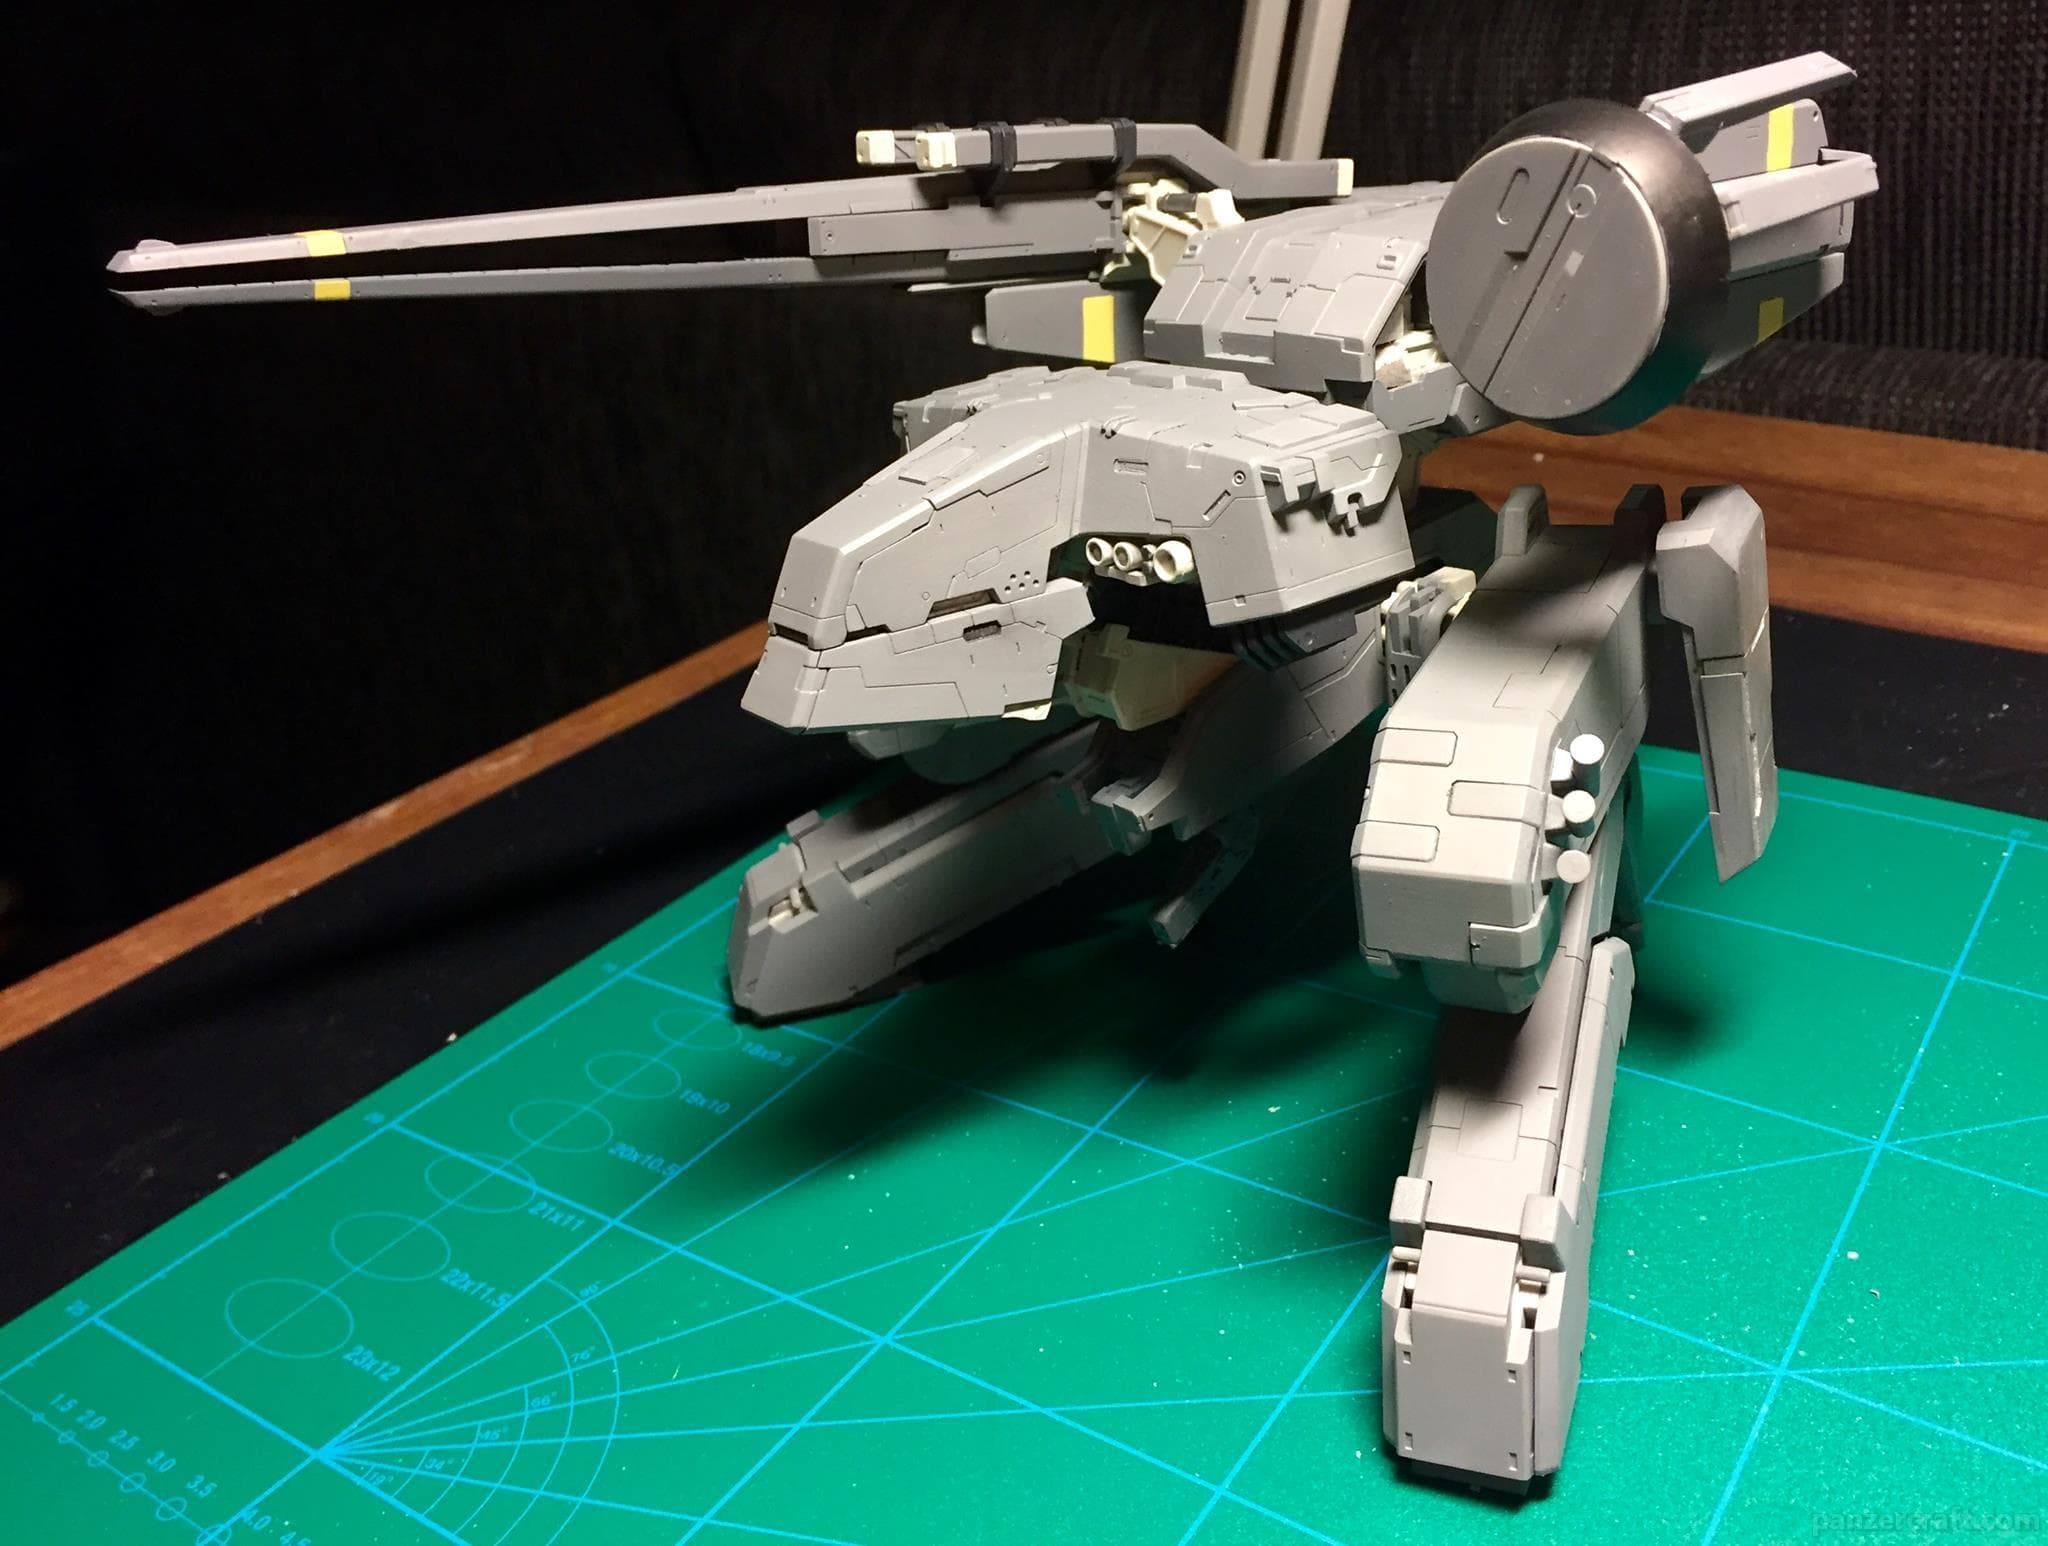 Metal Gear Rex (8) - Gray color airbrushed